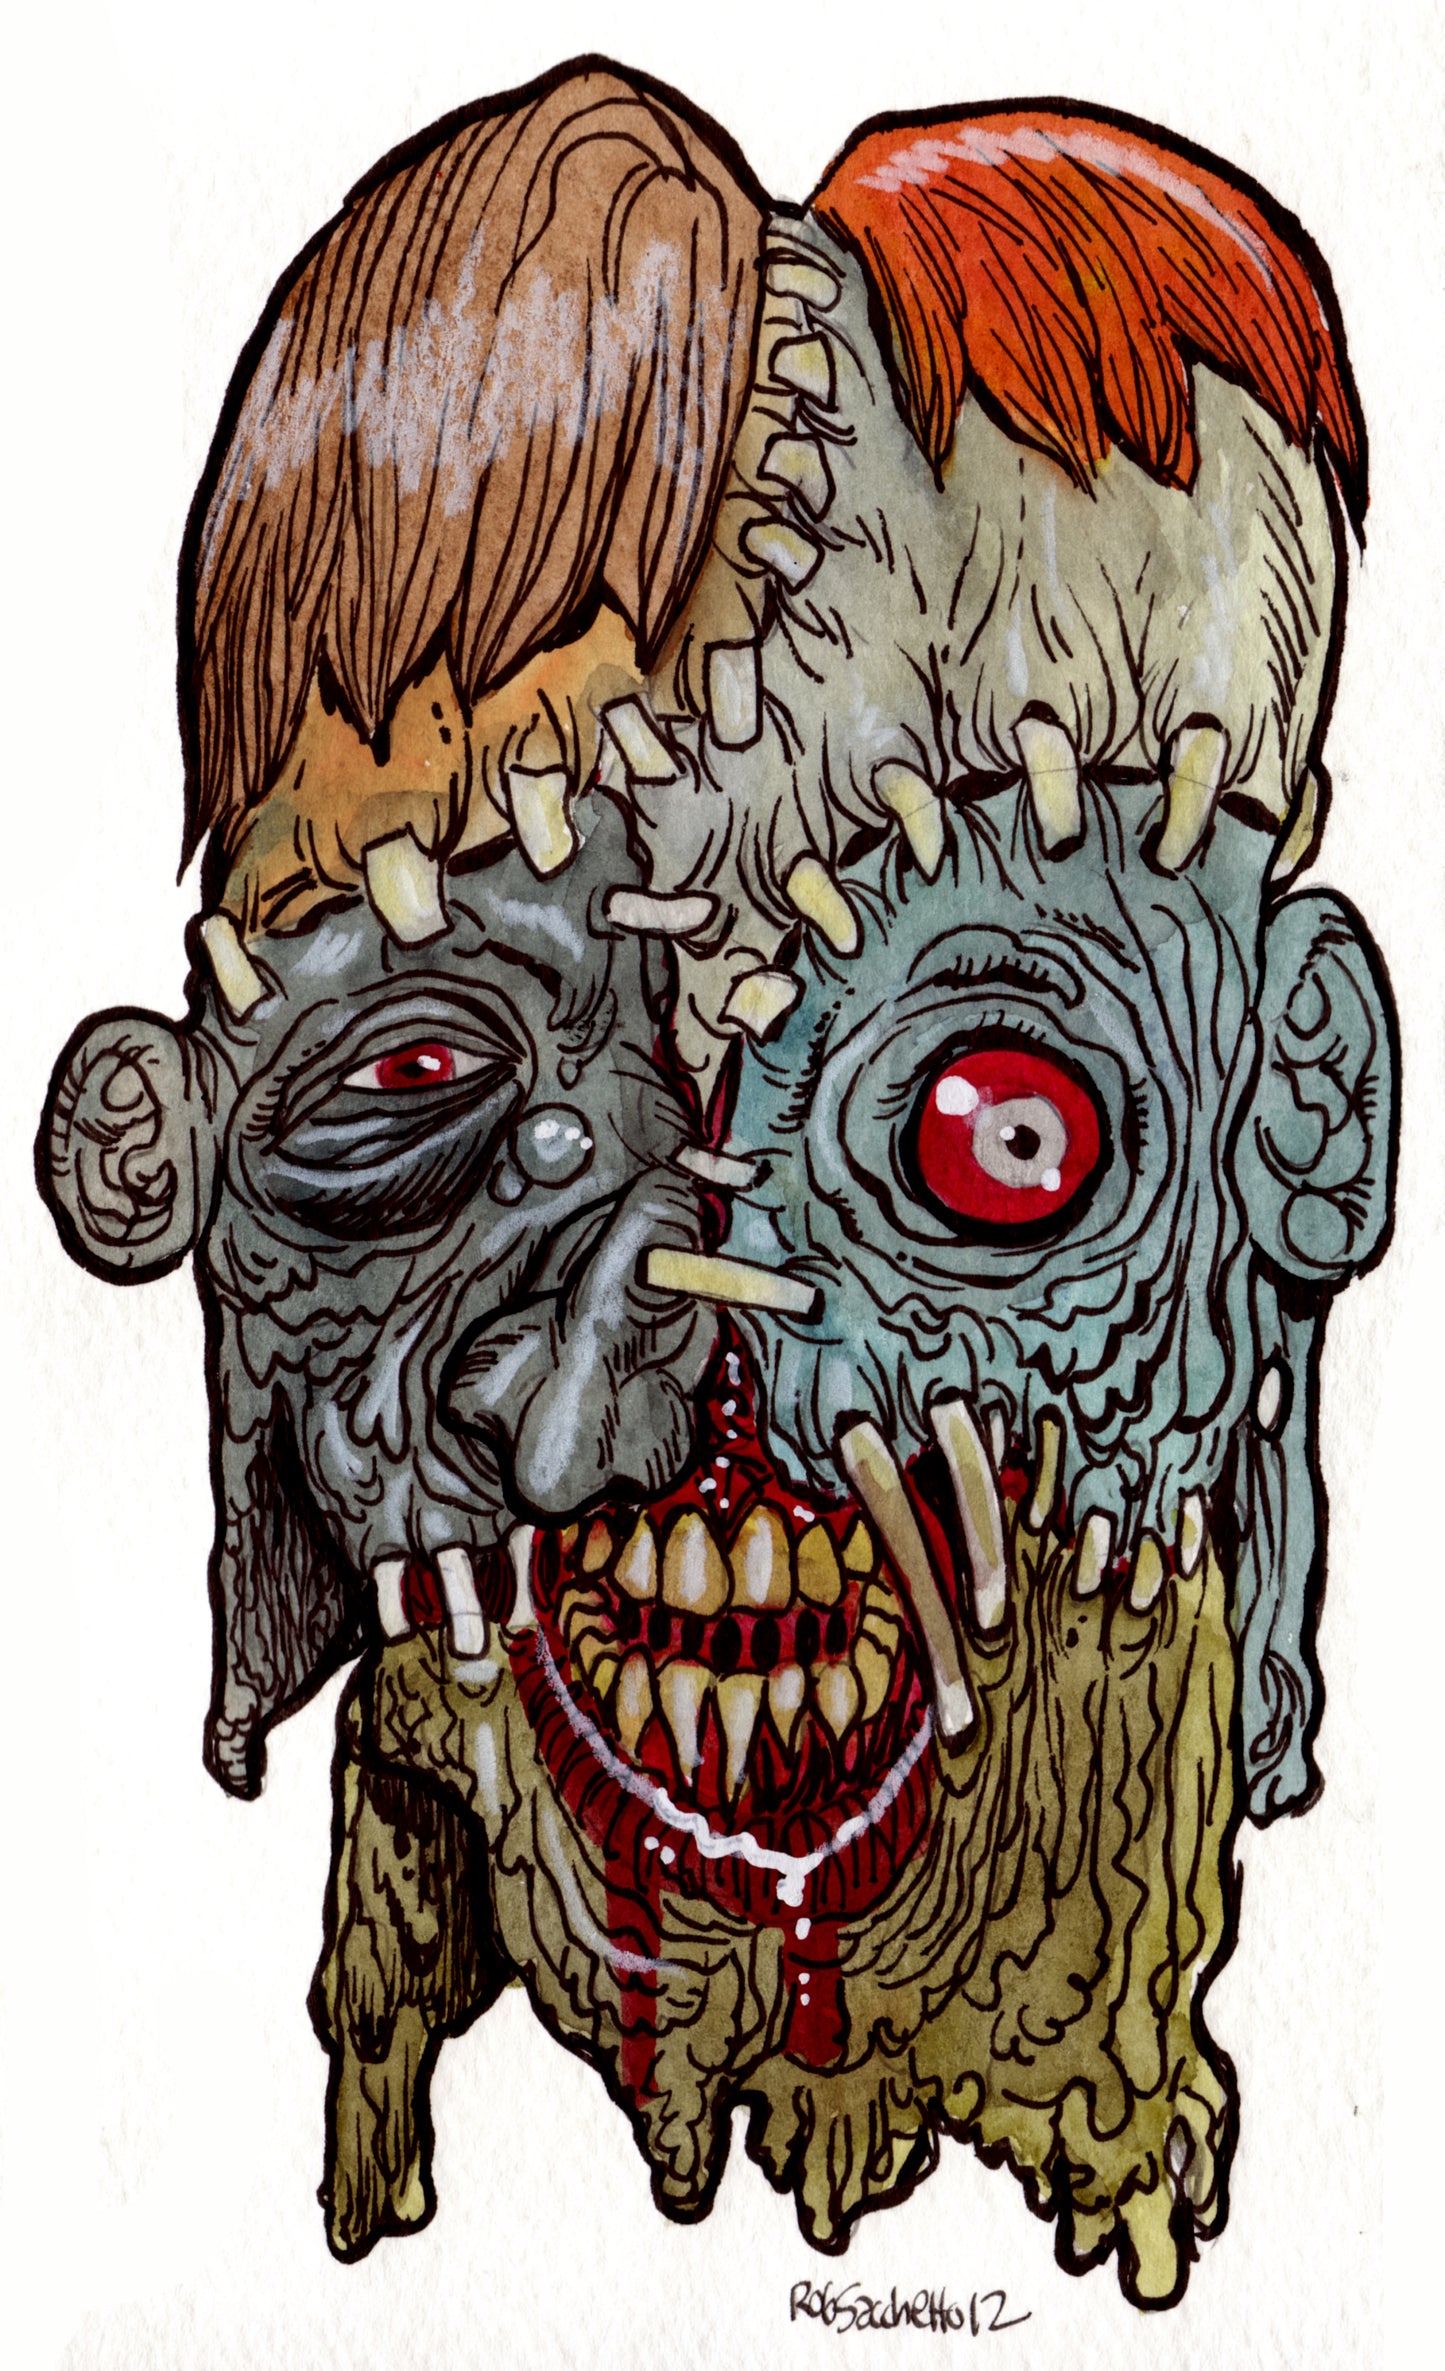 Heads of the Living Dead : Patchwork Atrocity